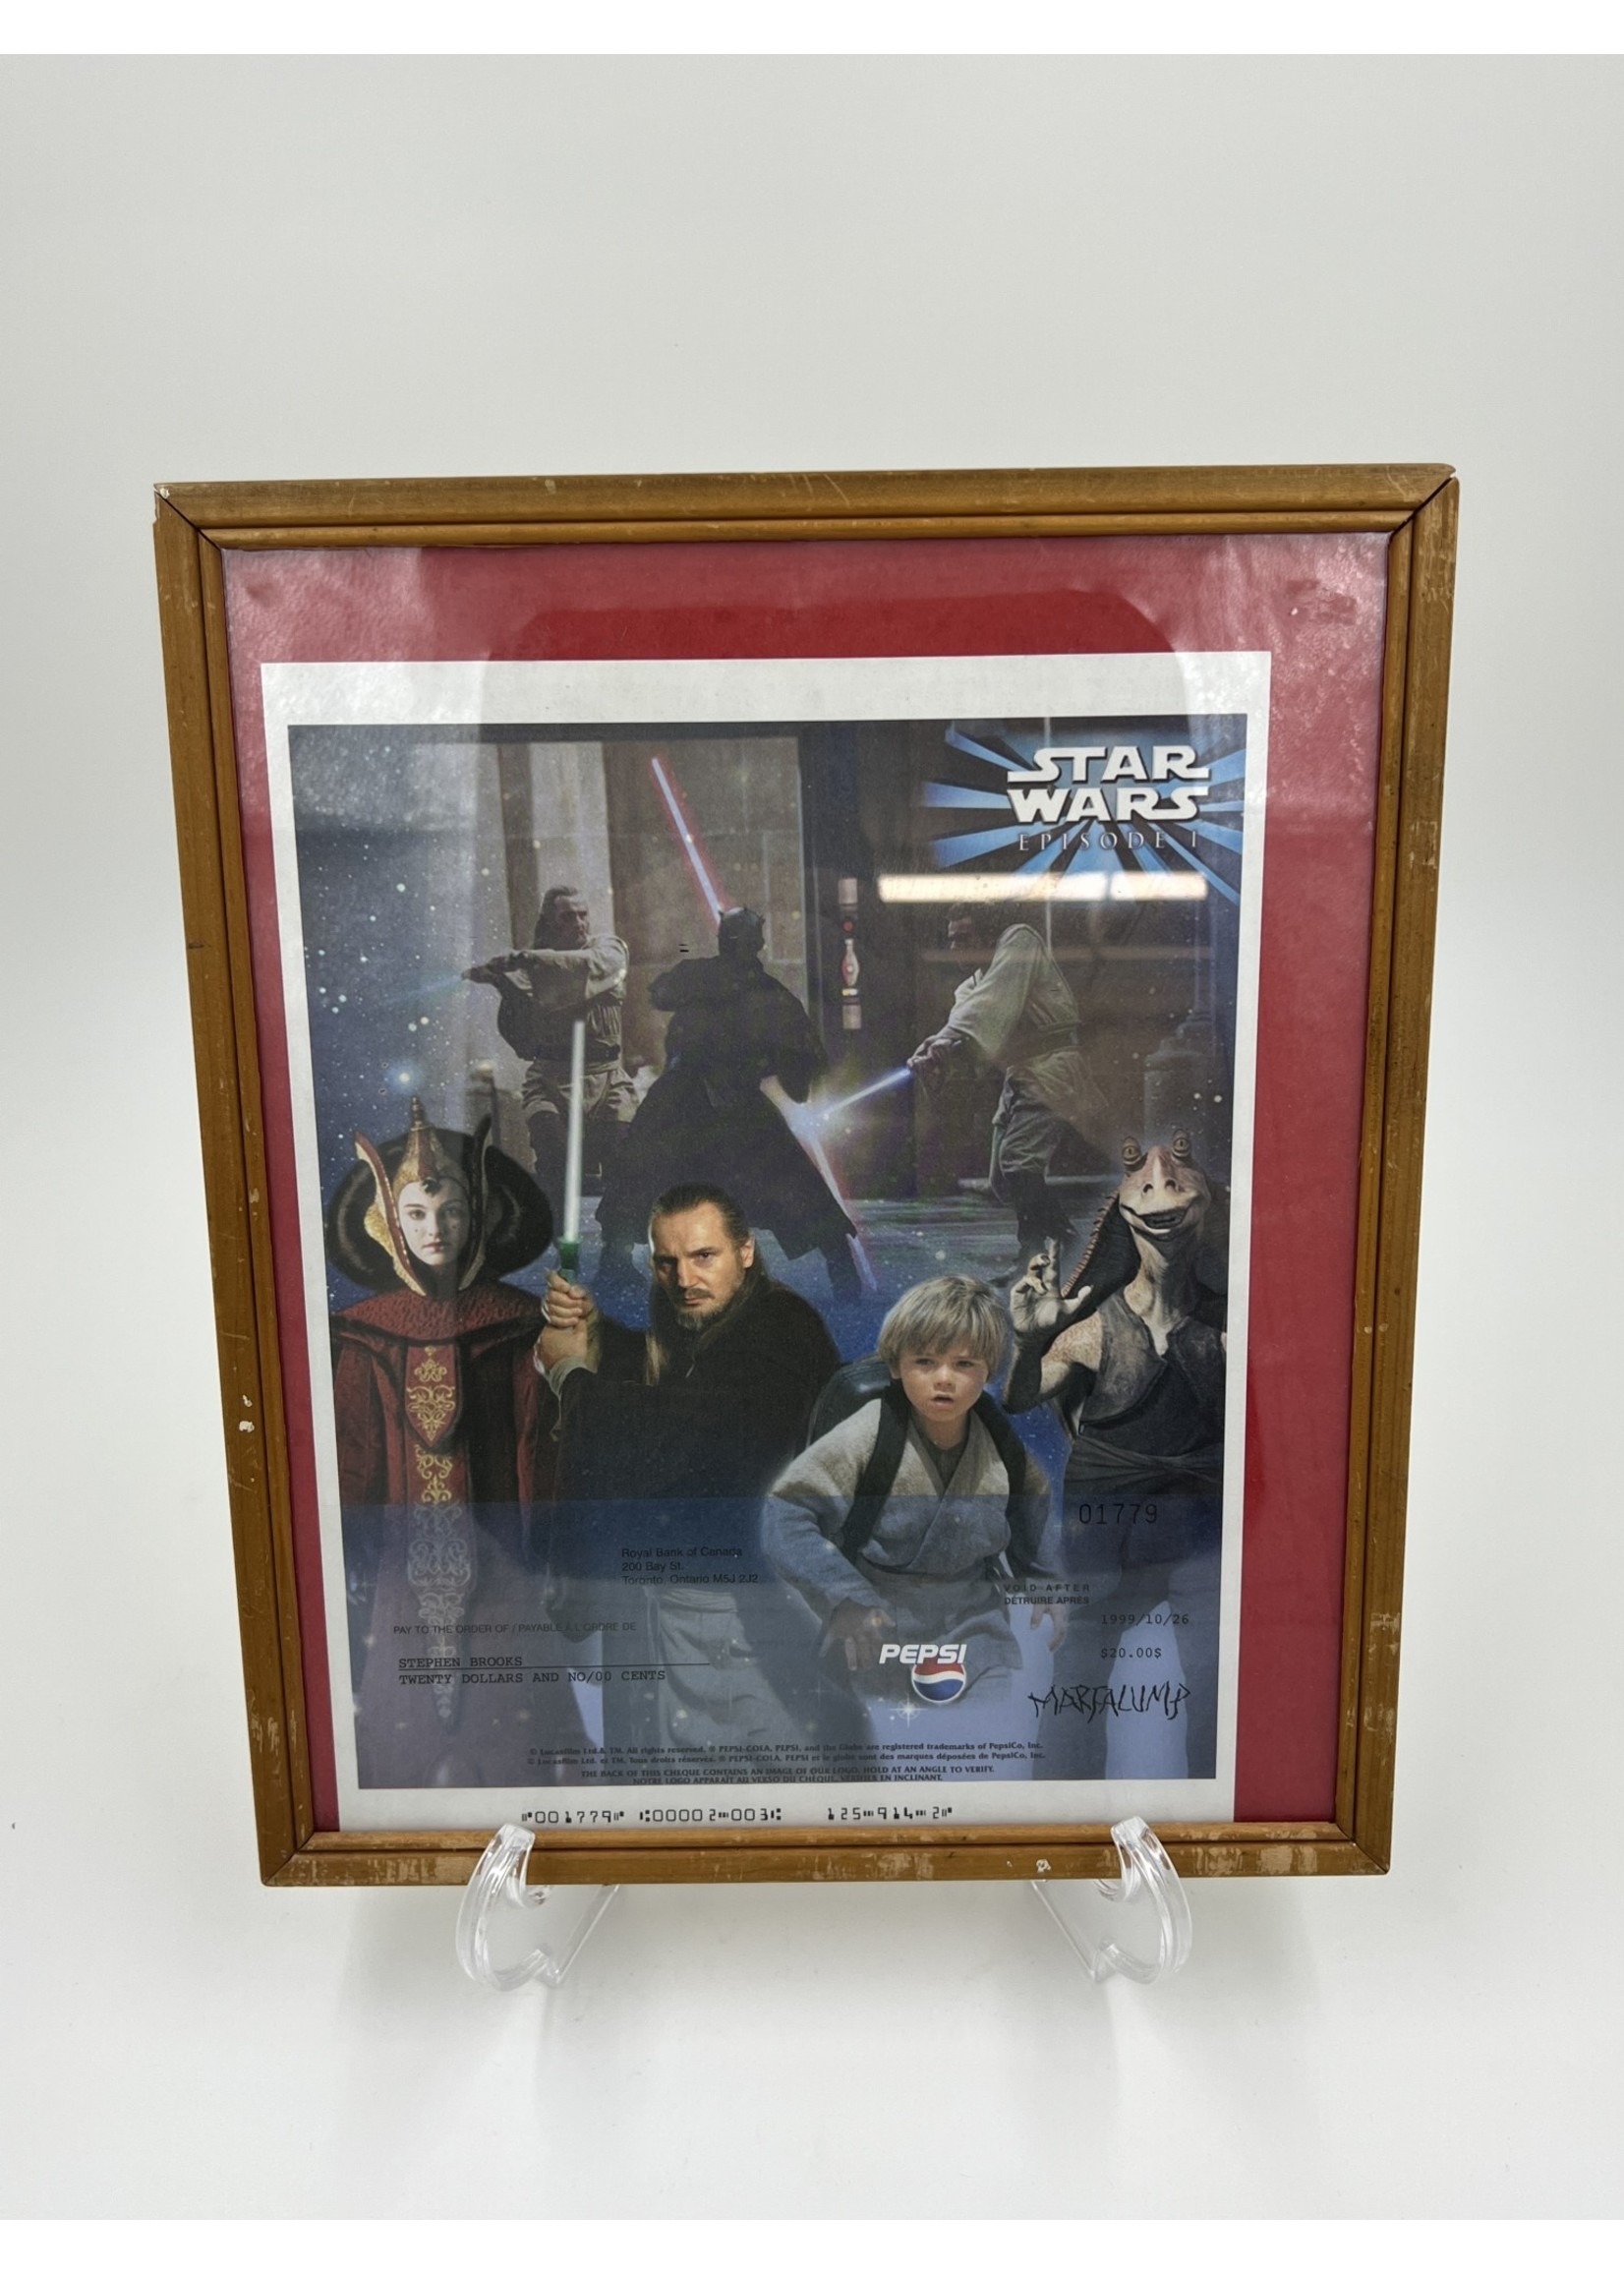 Other Things Framed Episode 1 Star Wars Pepsi Cheque